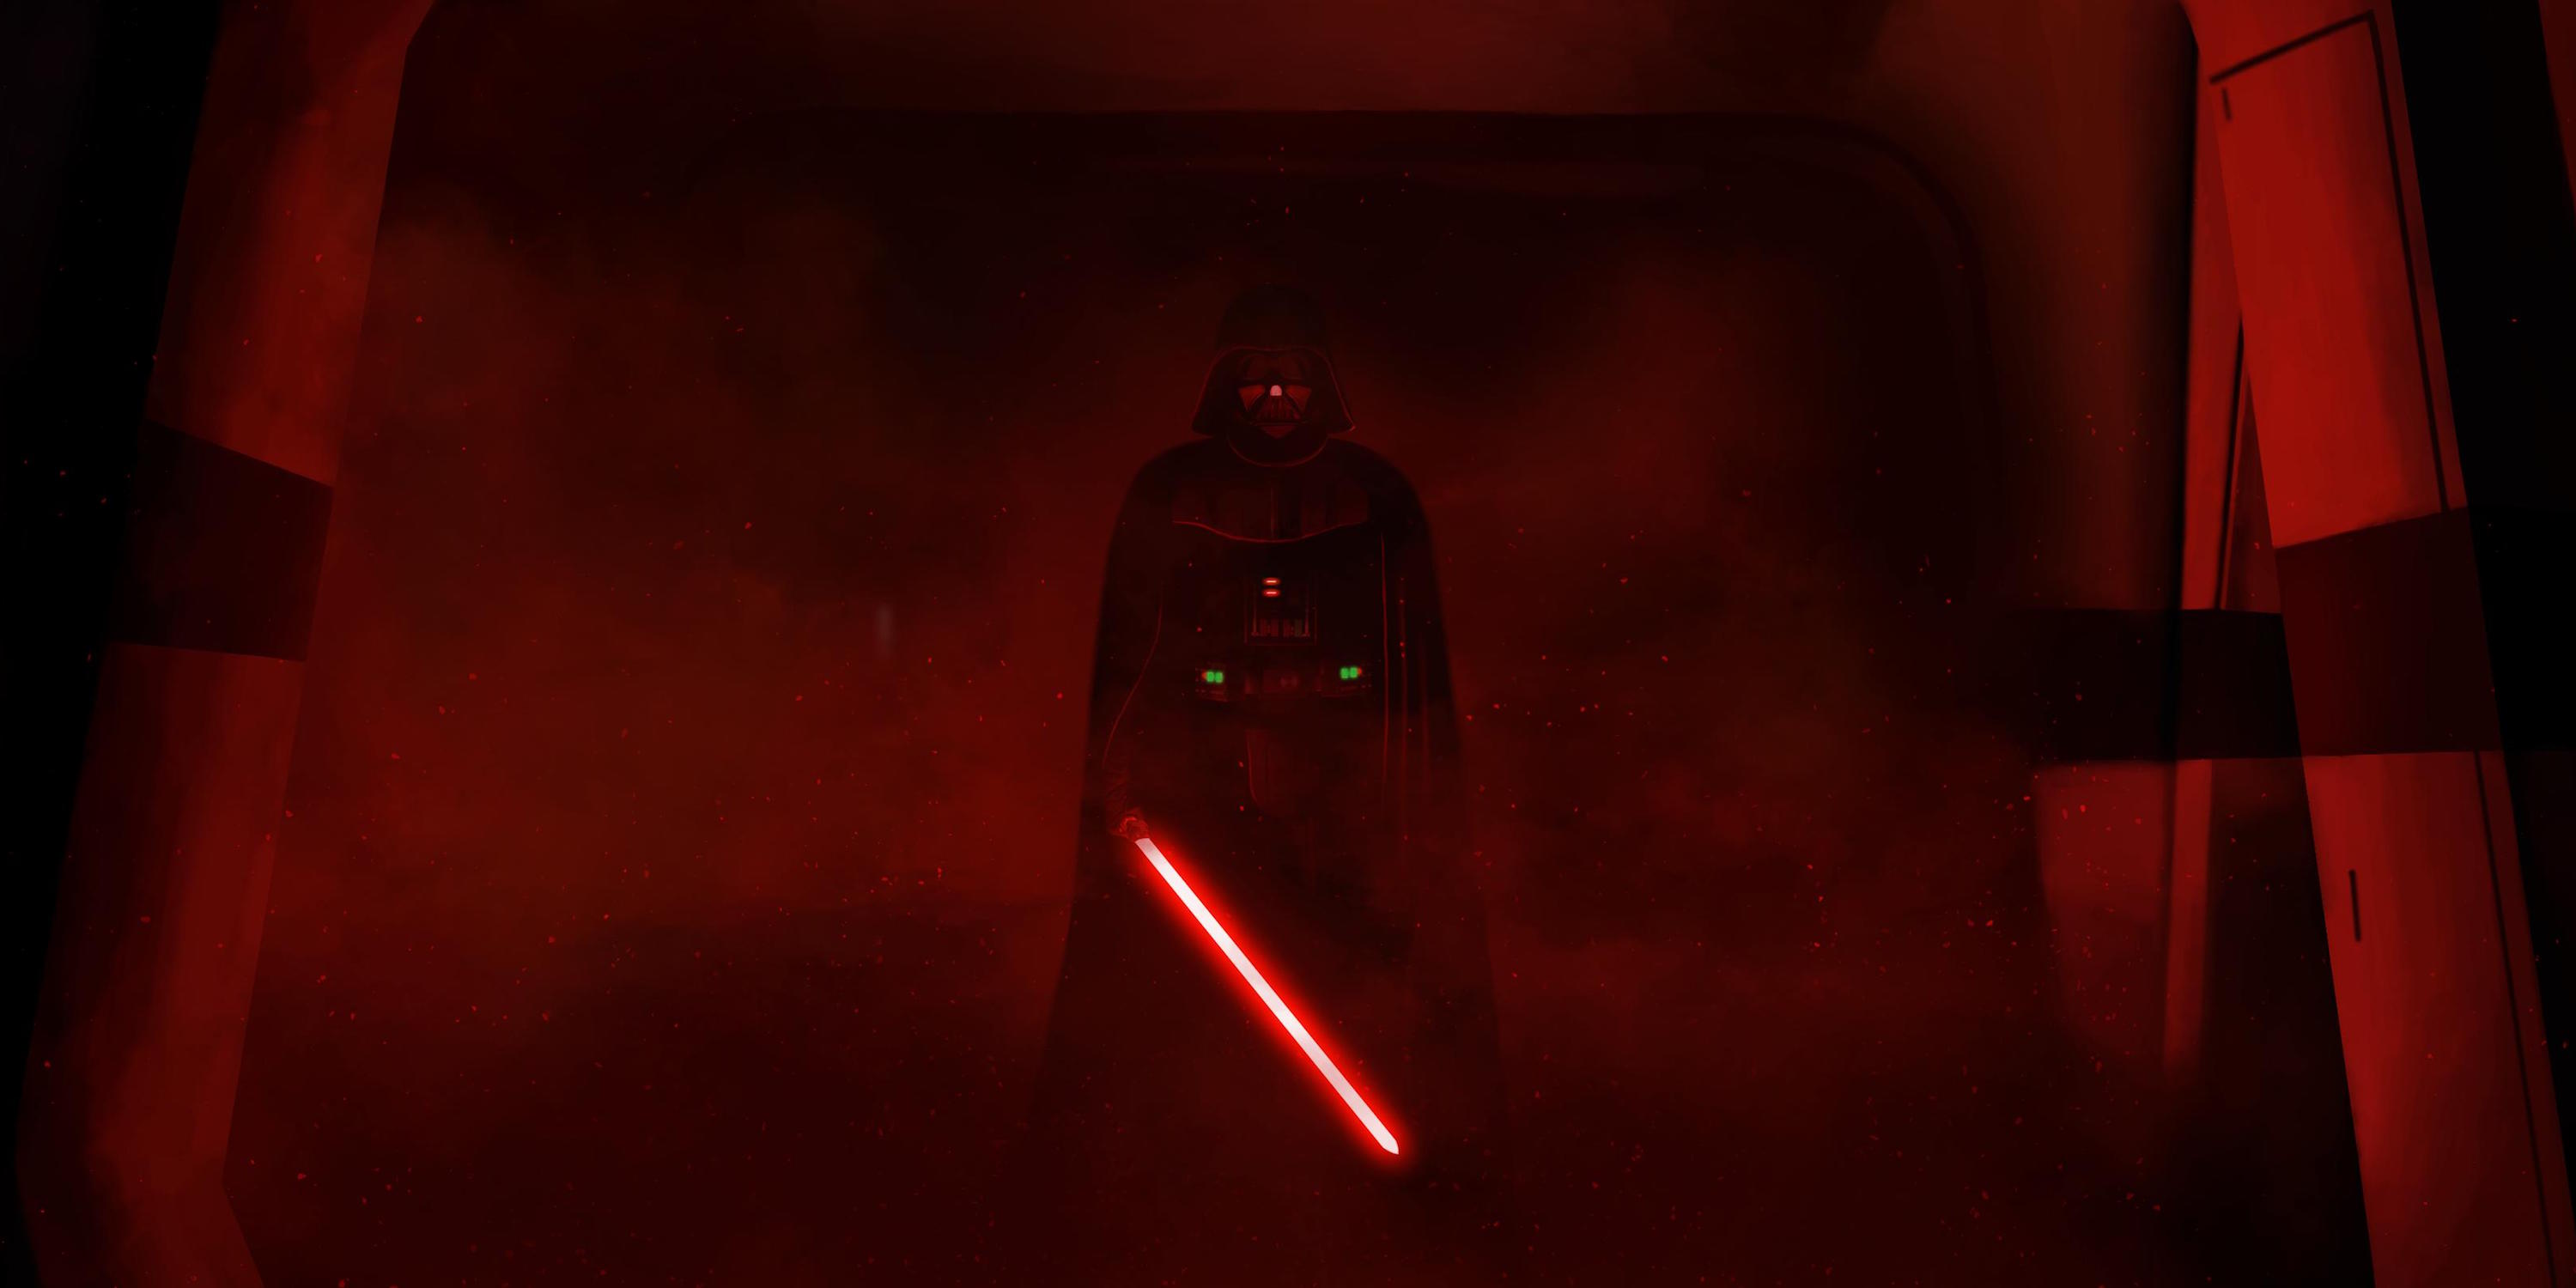 Darth-Vader-Final-Scene-from-Rogue-One-A-Star-Wars-Story.jpg